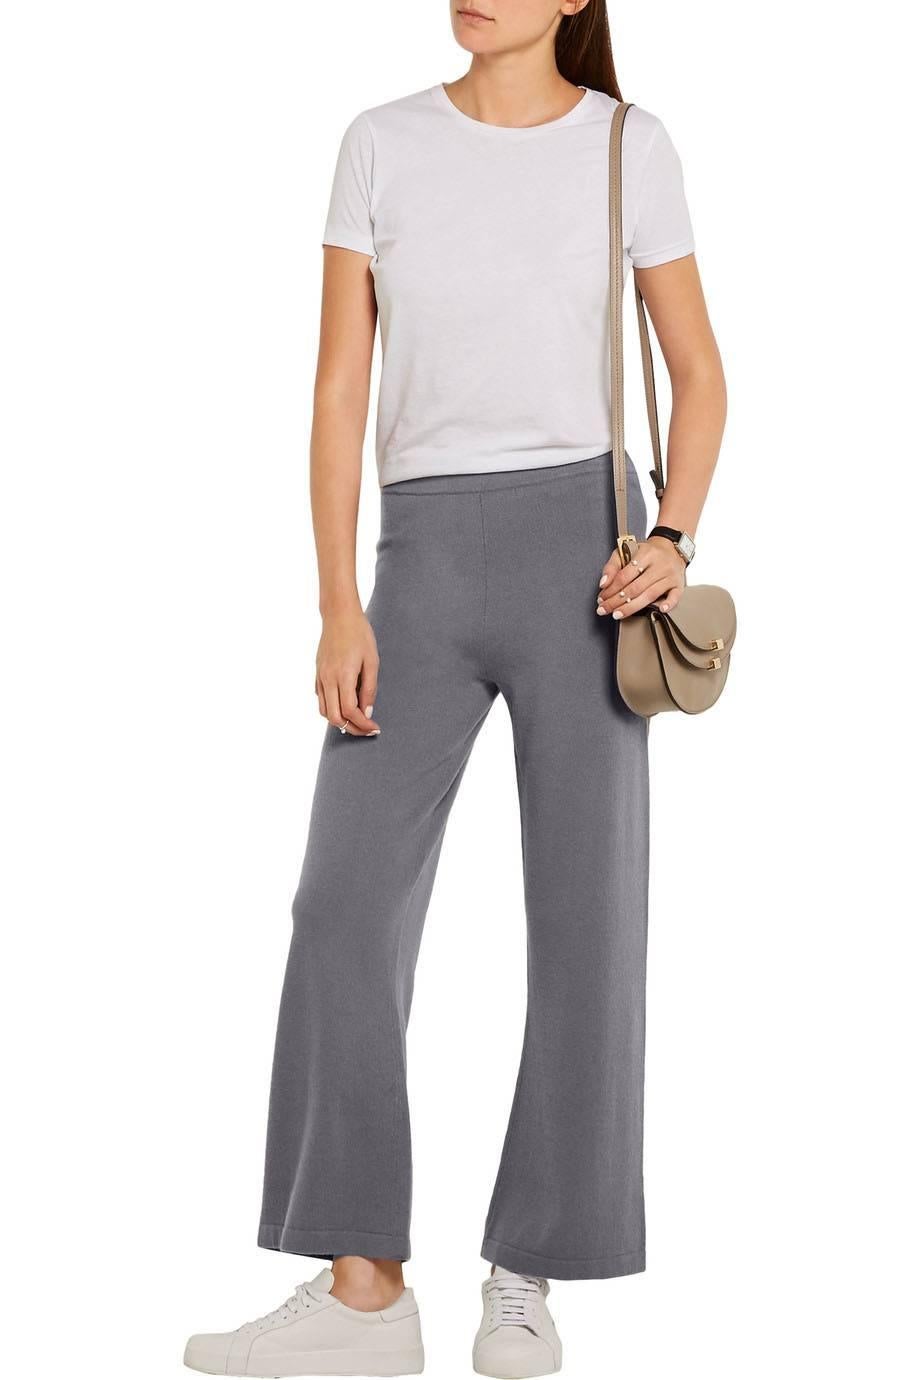 Allude Taupe Cashmere Wide Leg Pants Sz M

Made In: China
Color: Taupe
Composition: 100% cashmere
Closure/Opening: Stretch waistband
Retail Price: $479 + tax
Overall Condition: Excellent pre-owned condition, light pilling

Marked Size: M
Waist: